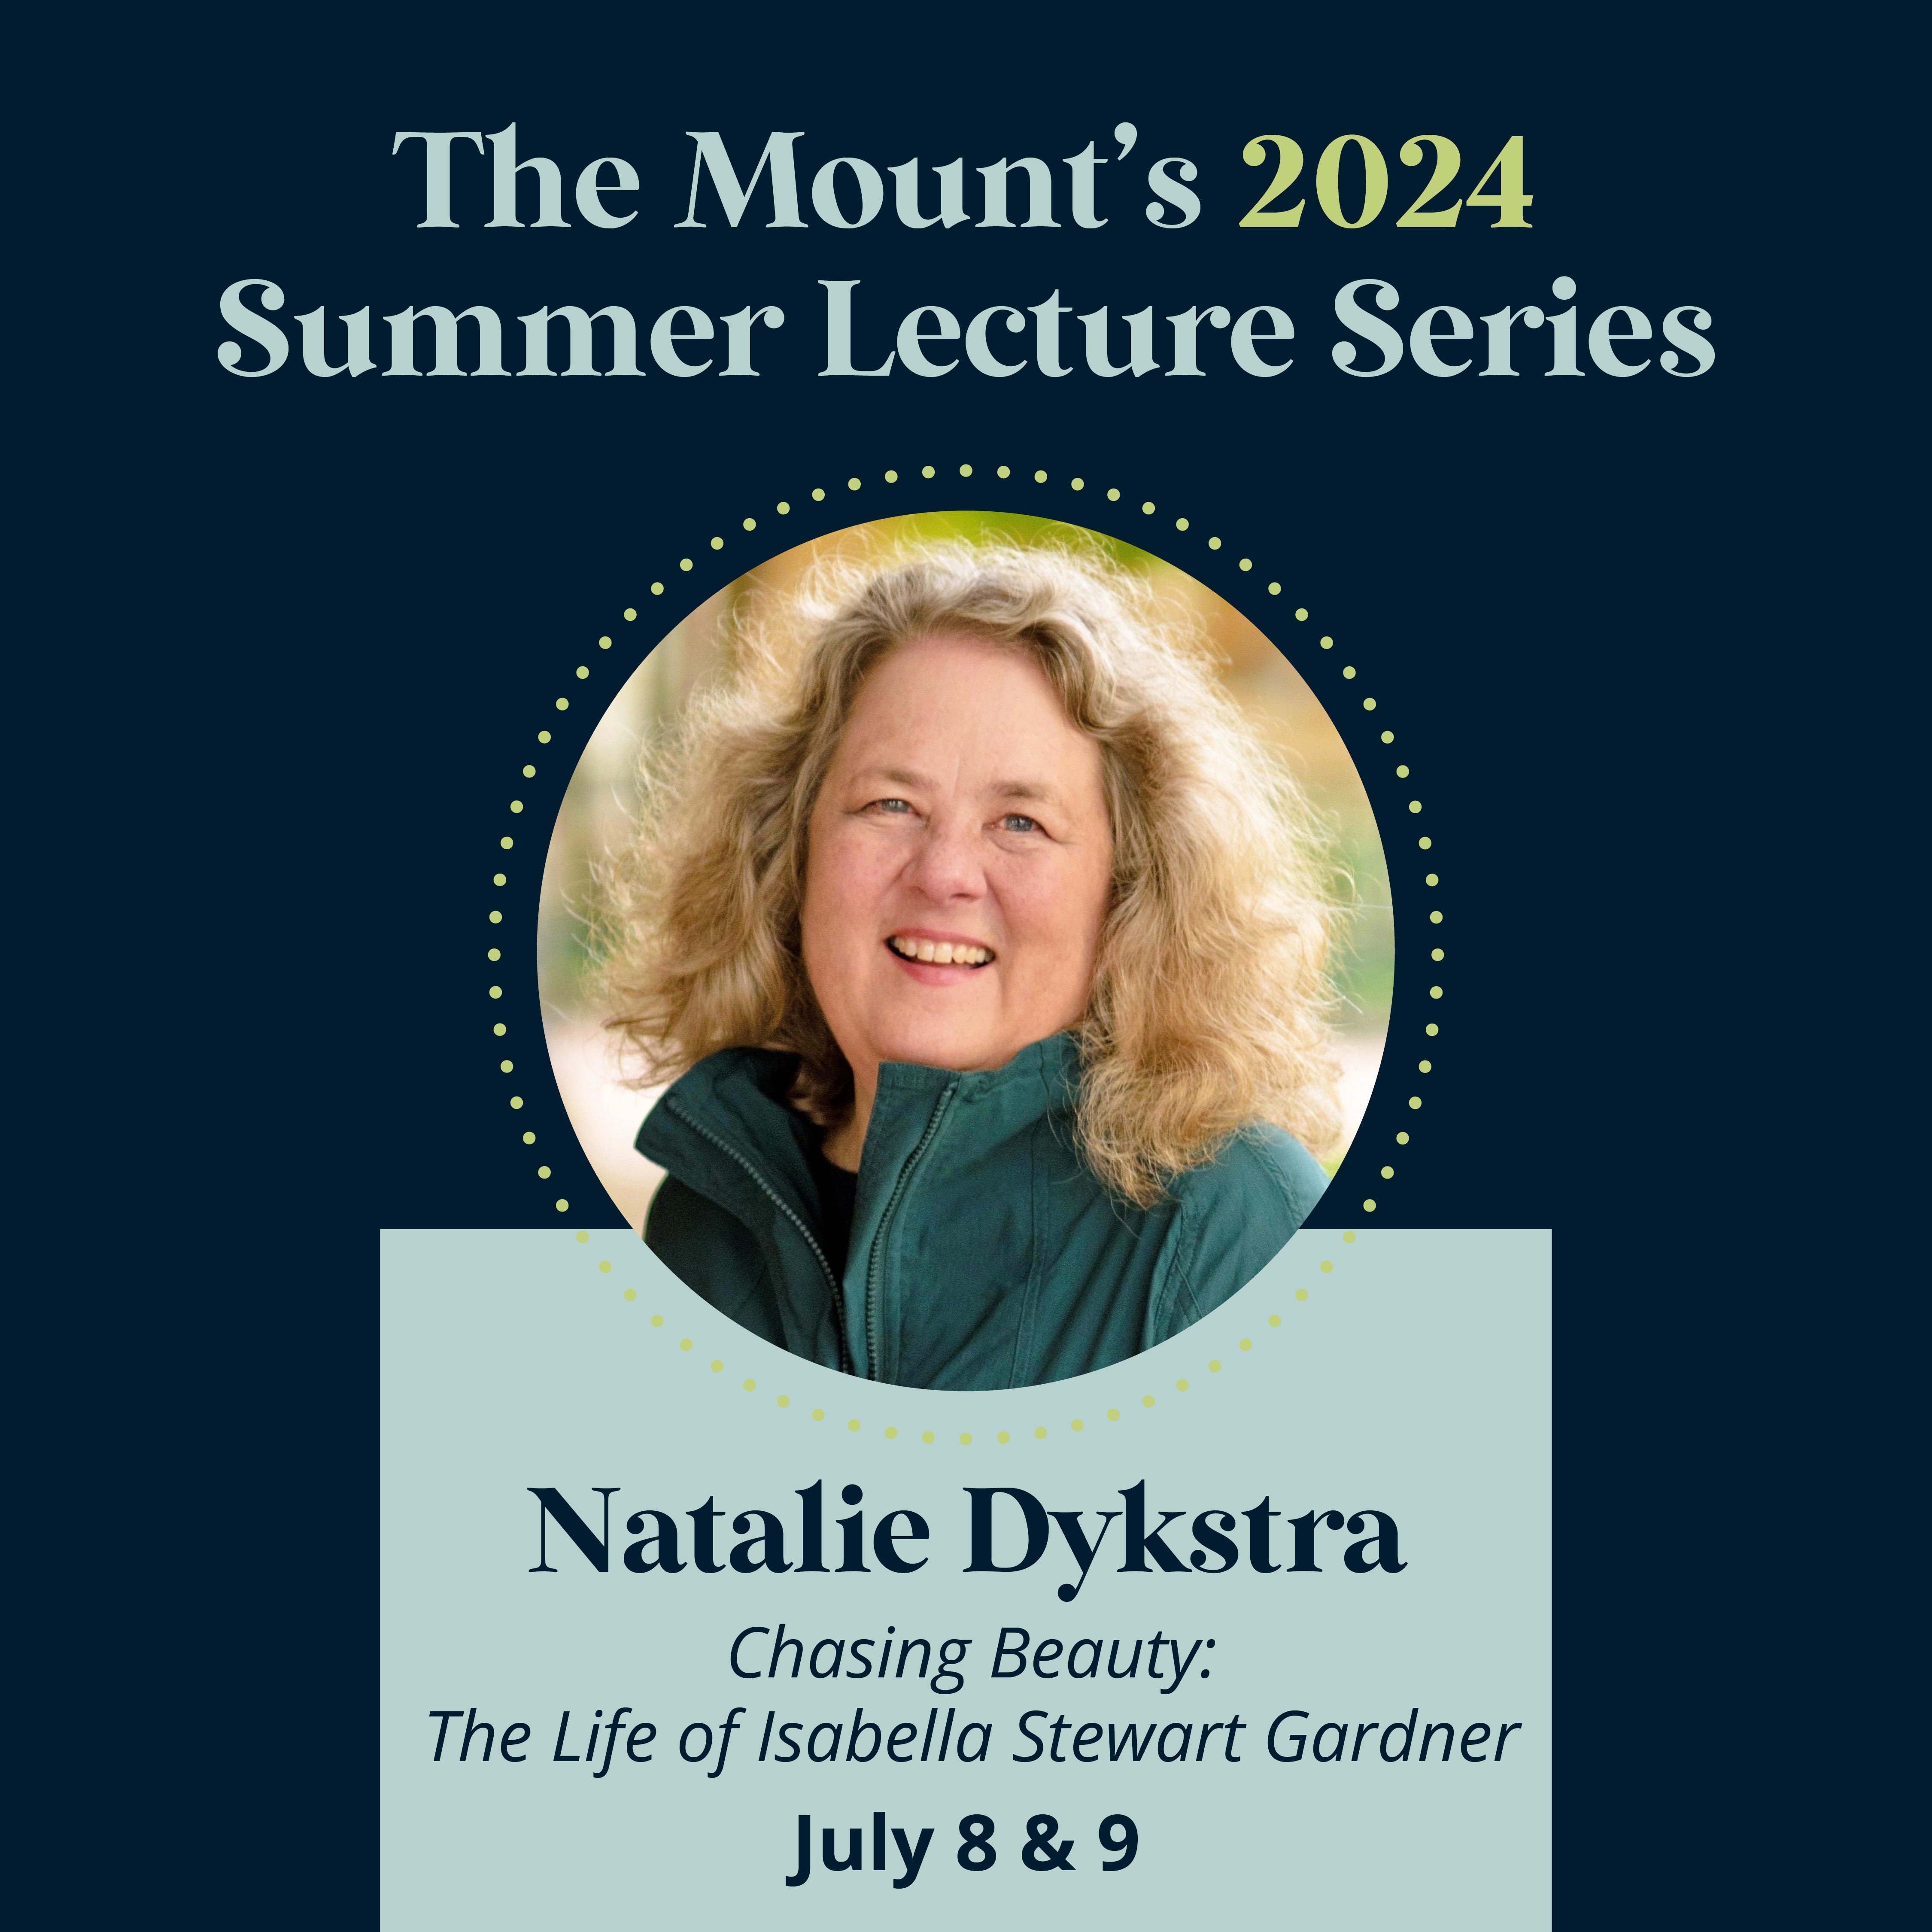 Monday lecture with Natalie Dykstra